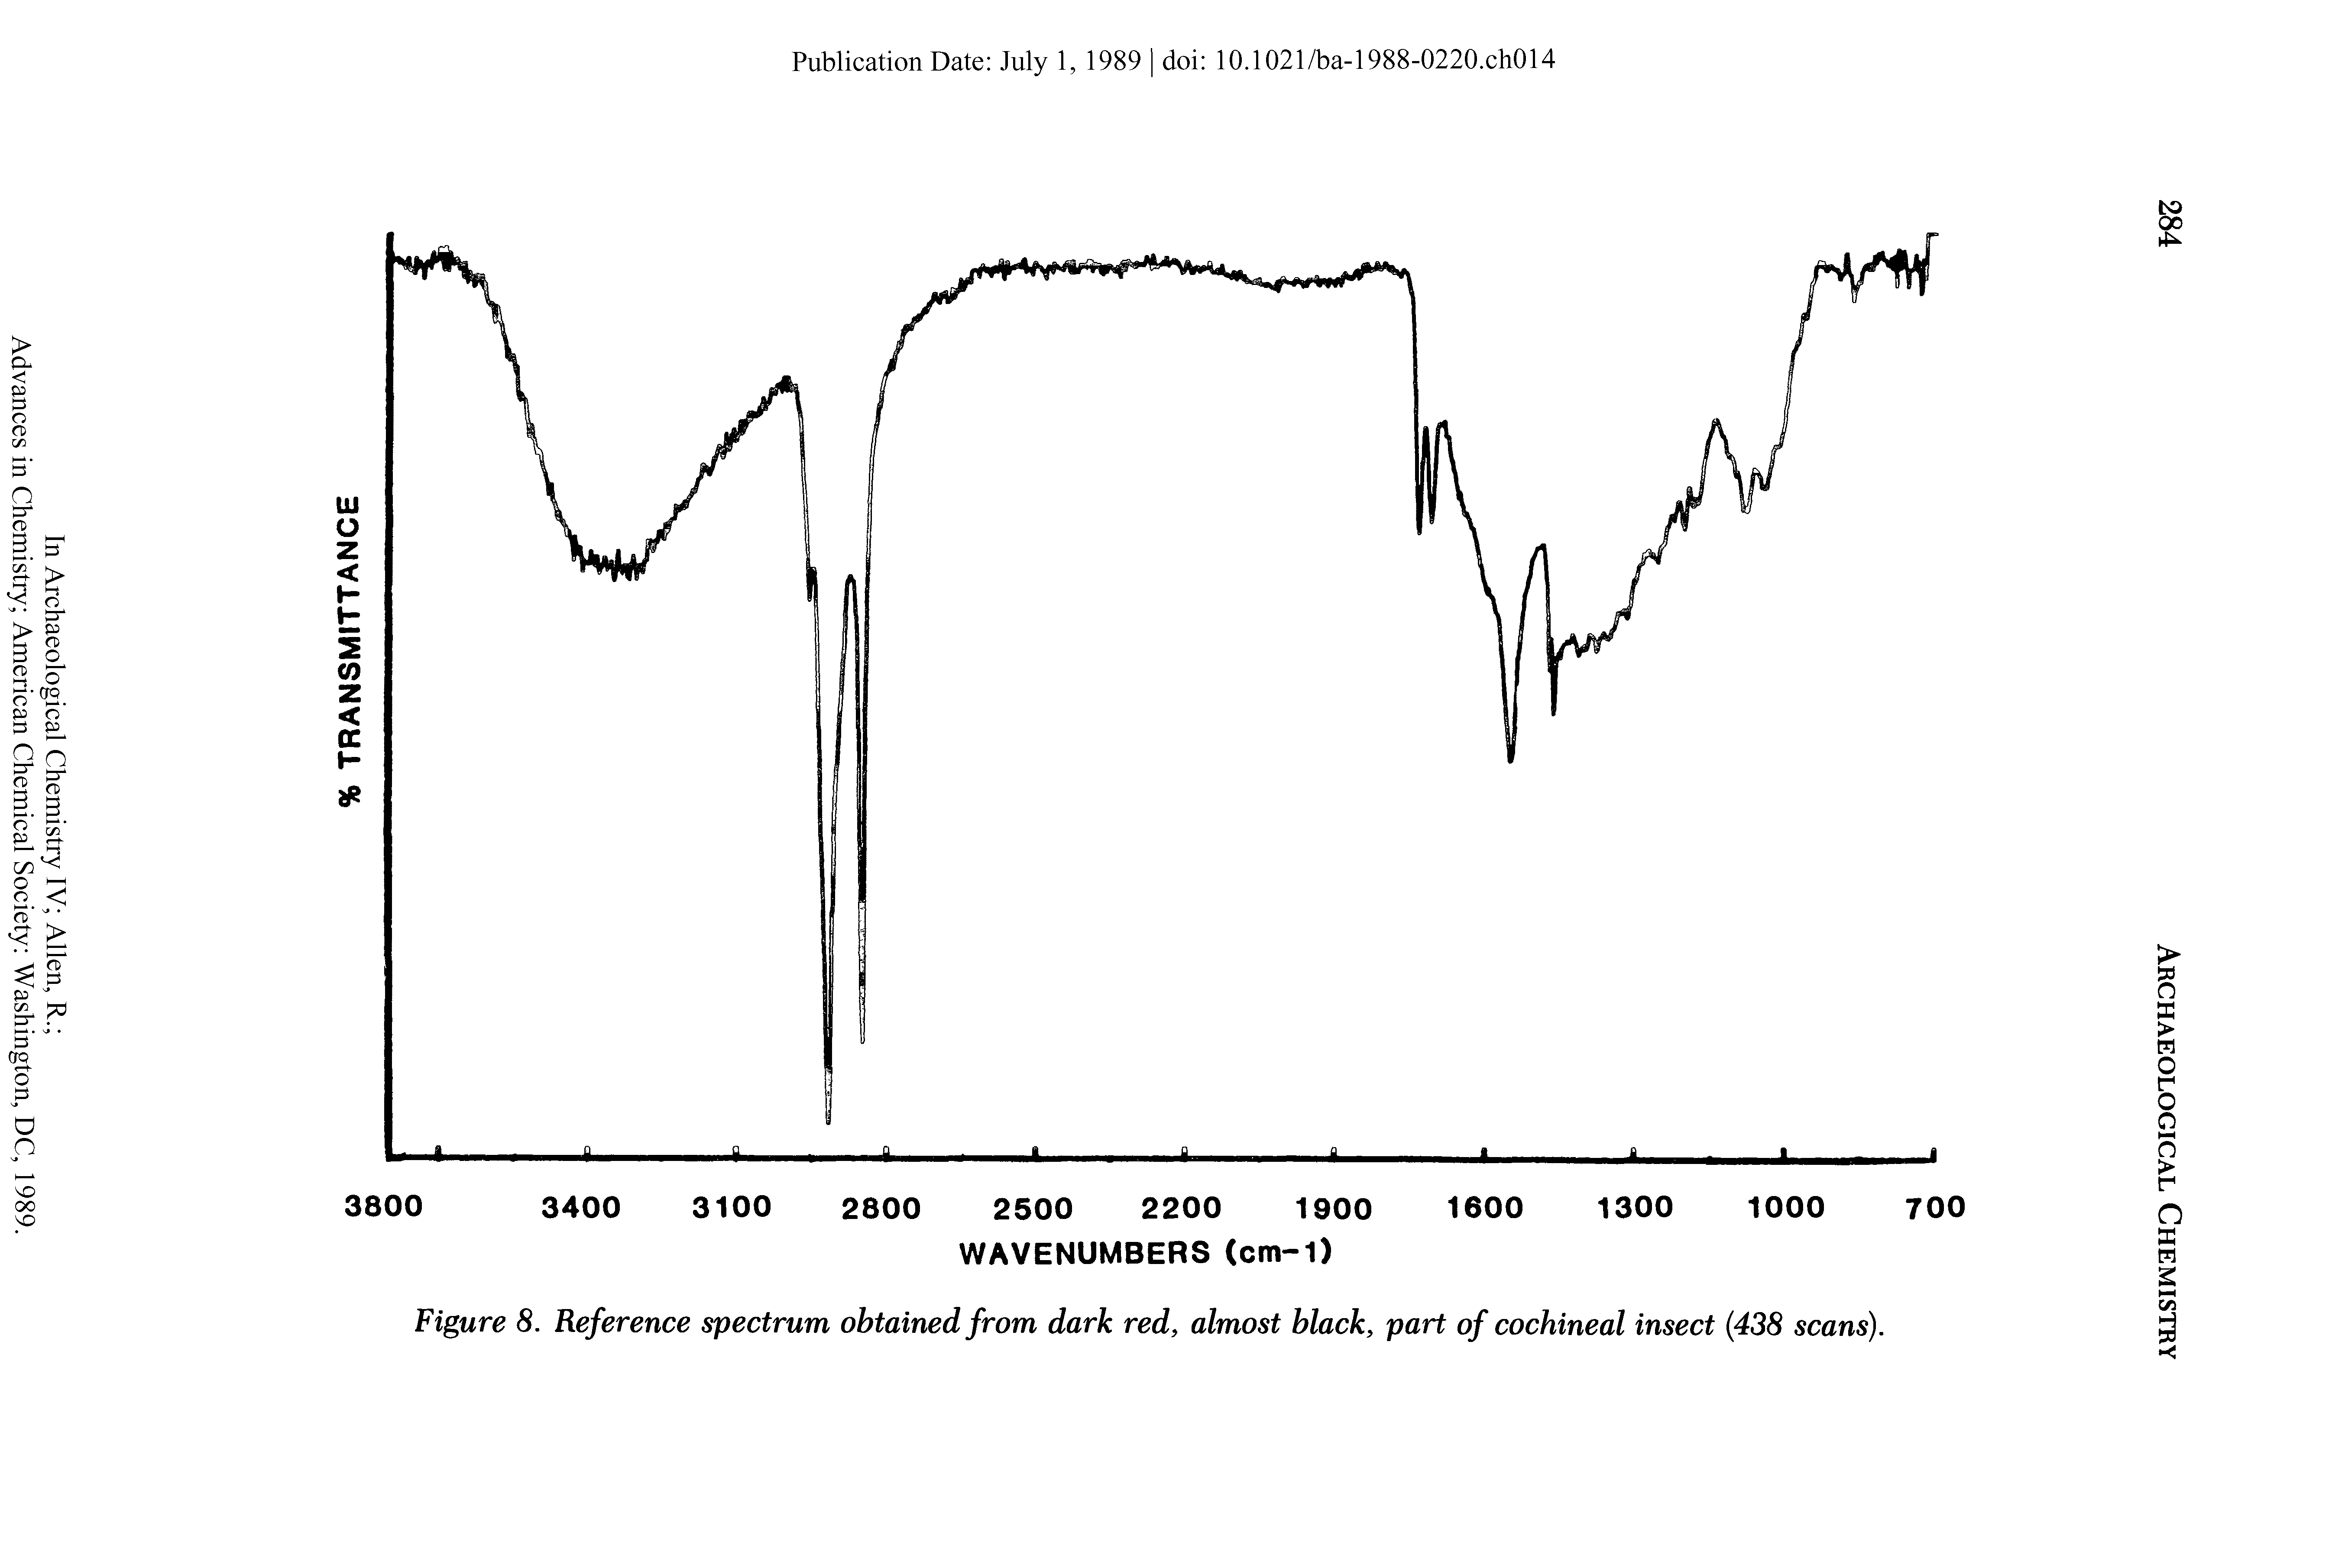 Figure 8. Reference spectrum obtained from dark red, almost black, part of cochineal insect (438 scans).